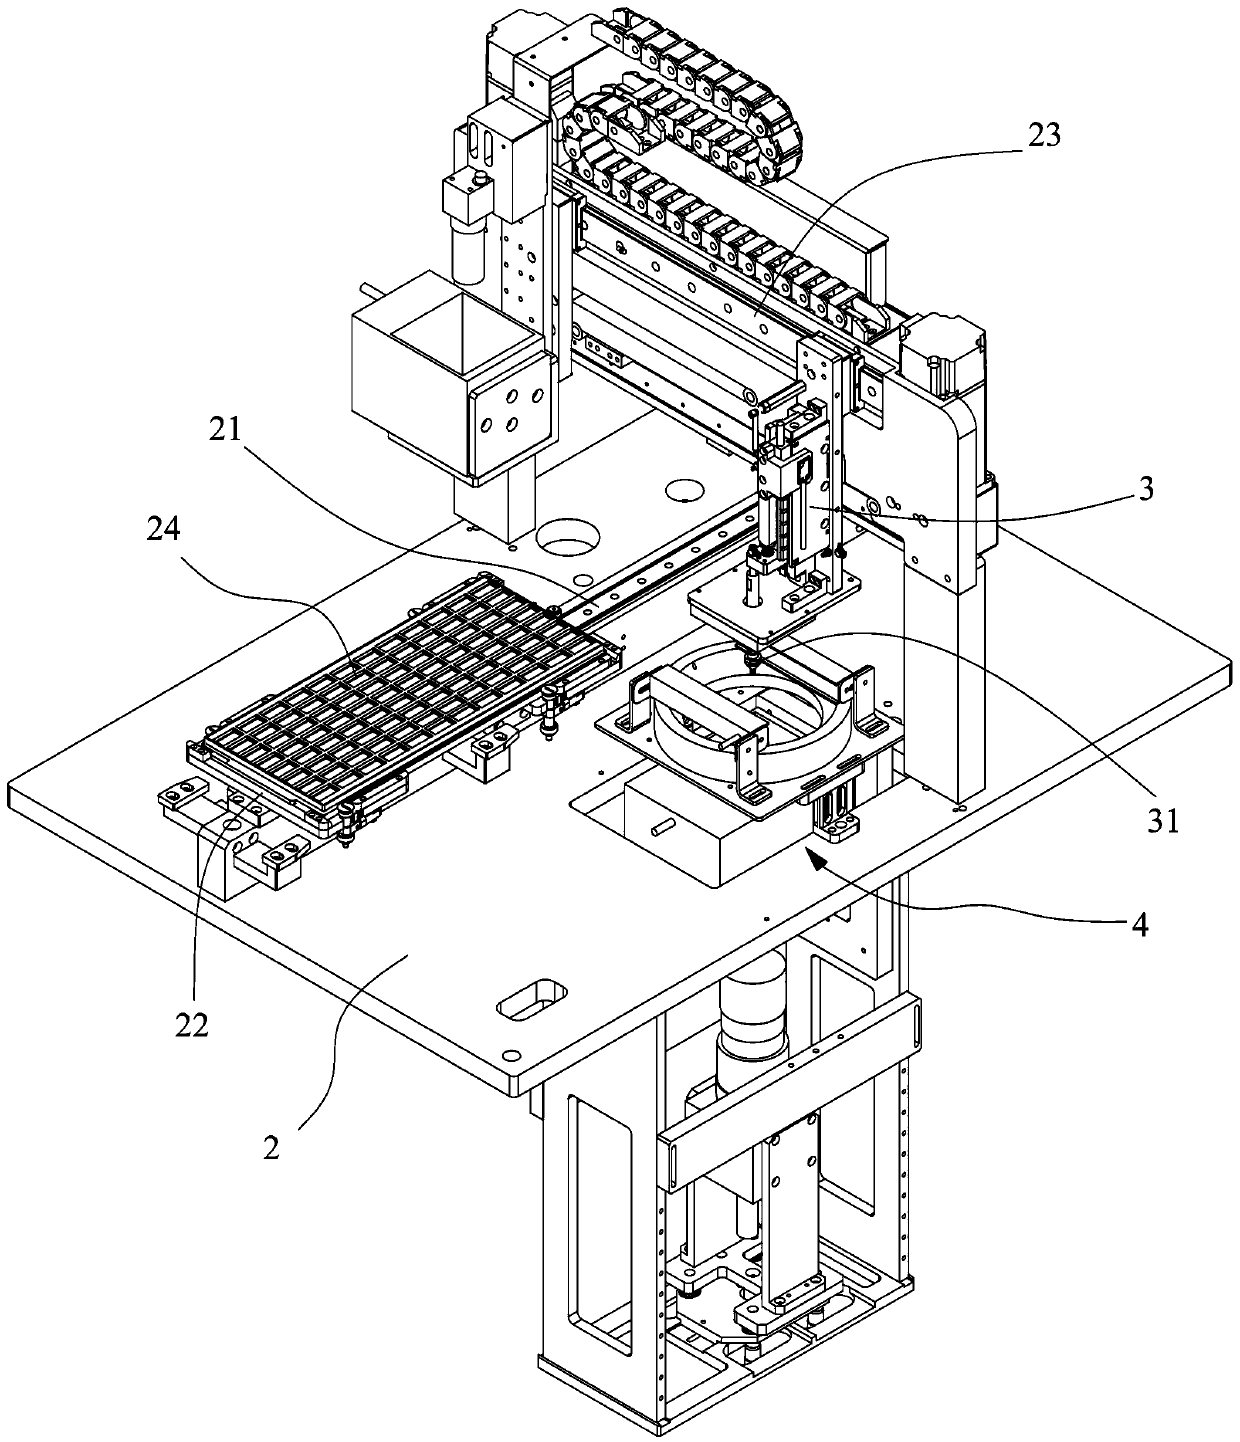 Semiconductor component appearance inspection equipment and its optical path structure